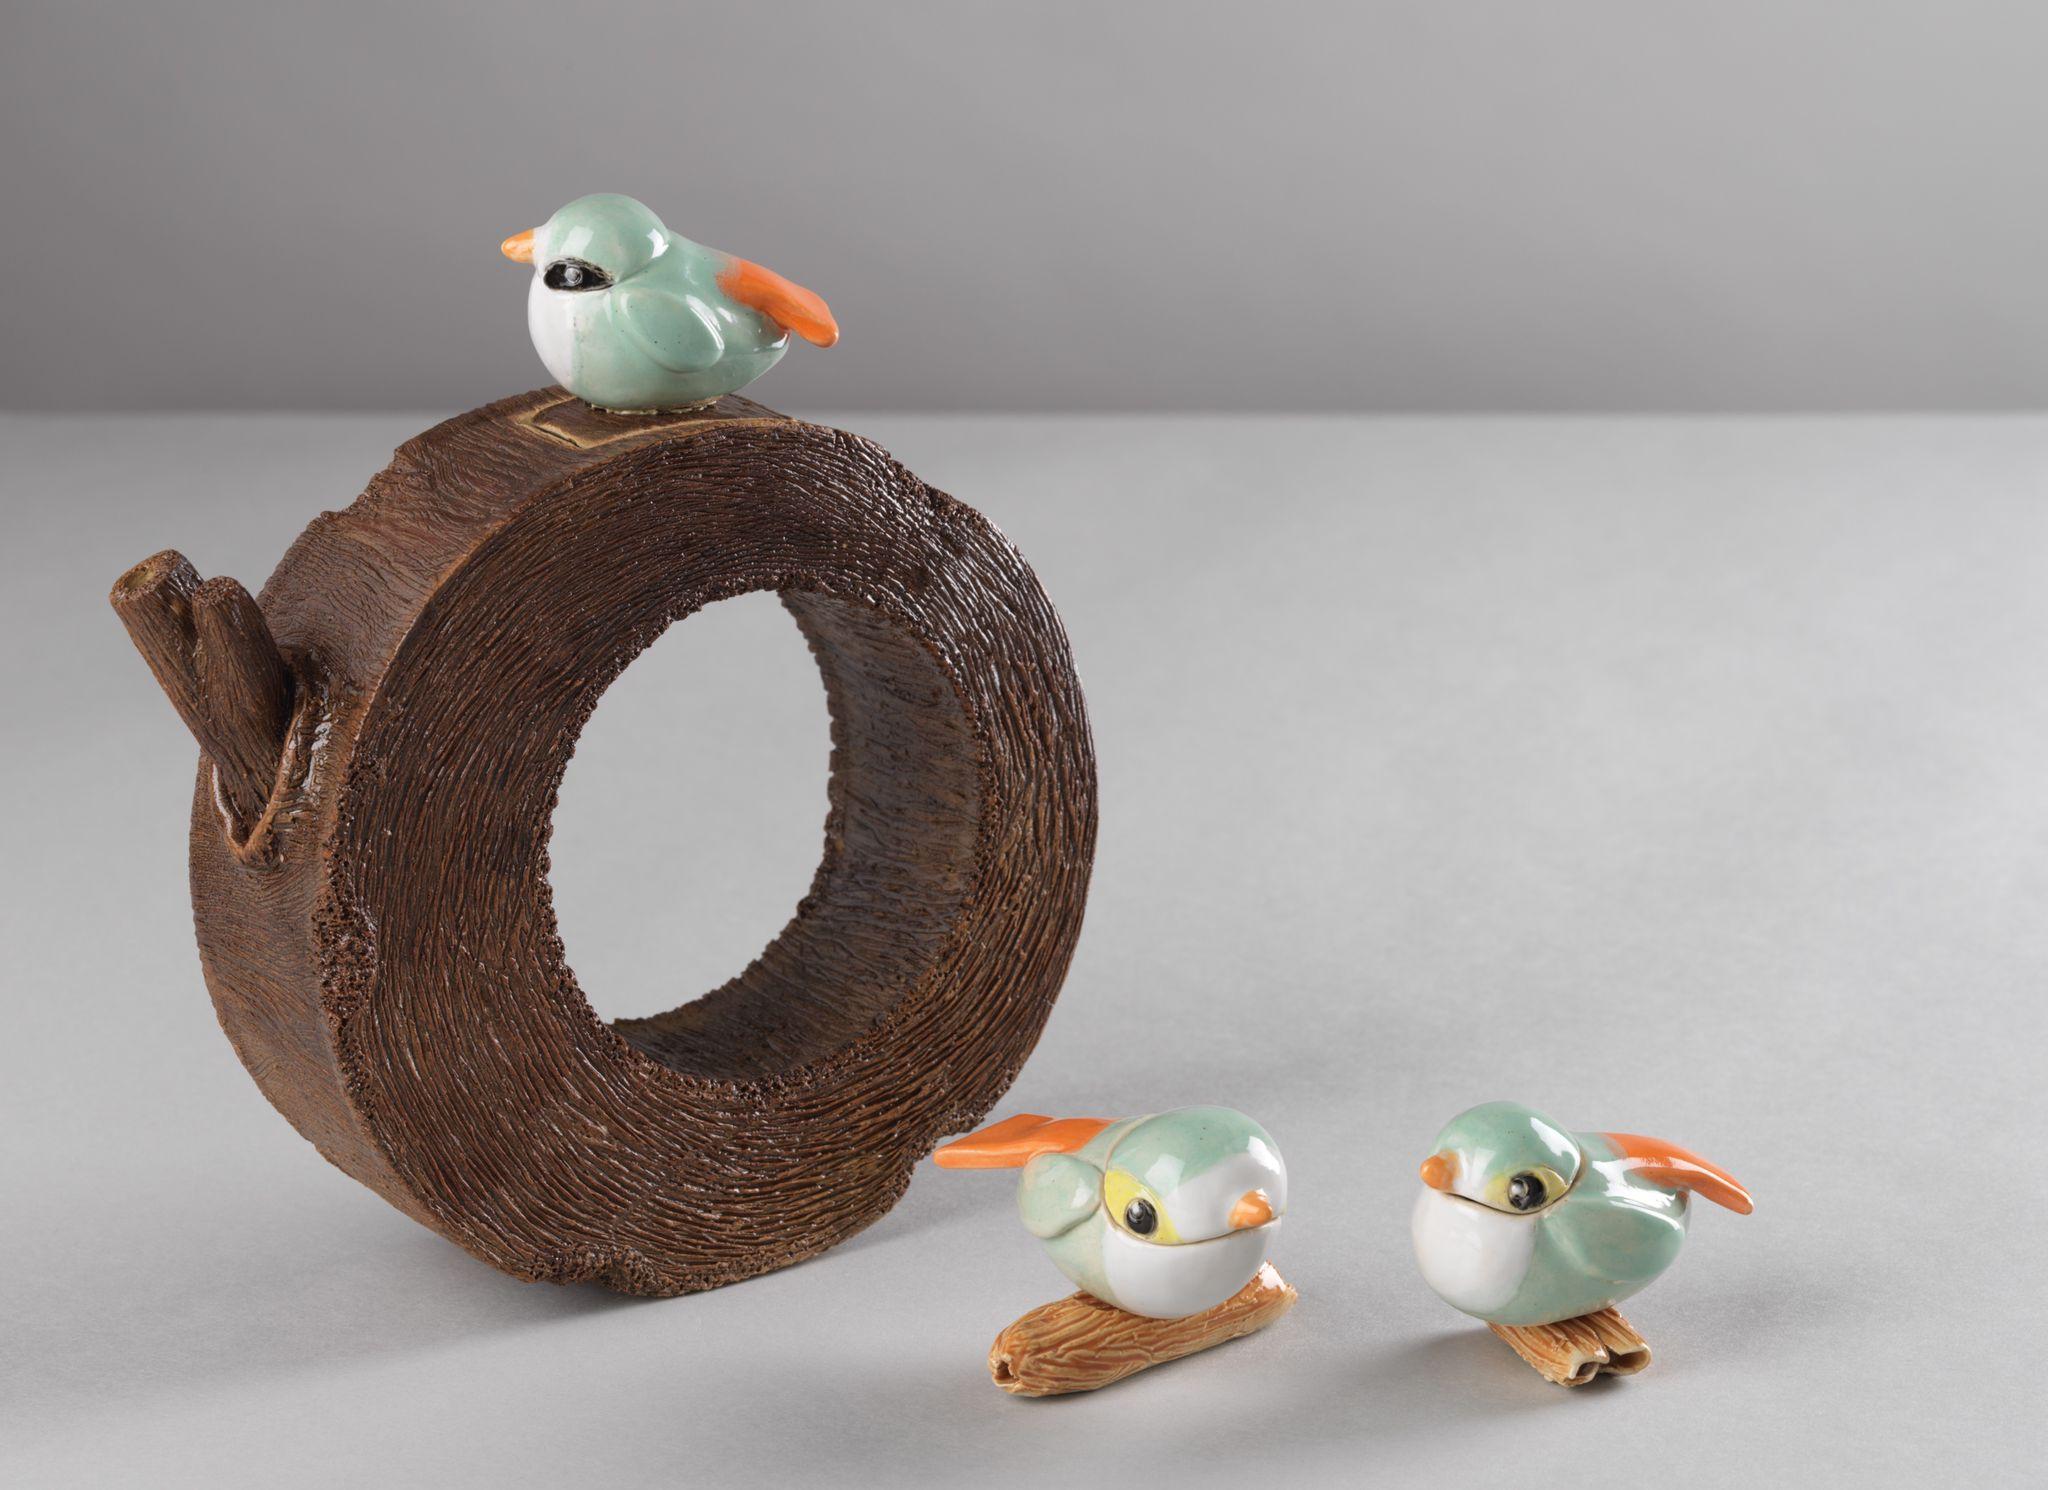 The "2021 Tea Ware by Hong Kong Potters" exhibition is being held at the Flagstaff House Museum of Tea Ware. Picture shows the First Prize winner in the Student Category, Yip Ho-nin's "High-tea-birds". 

